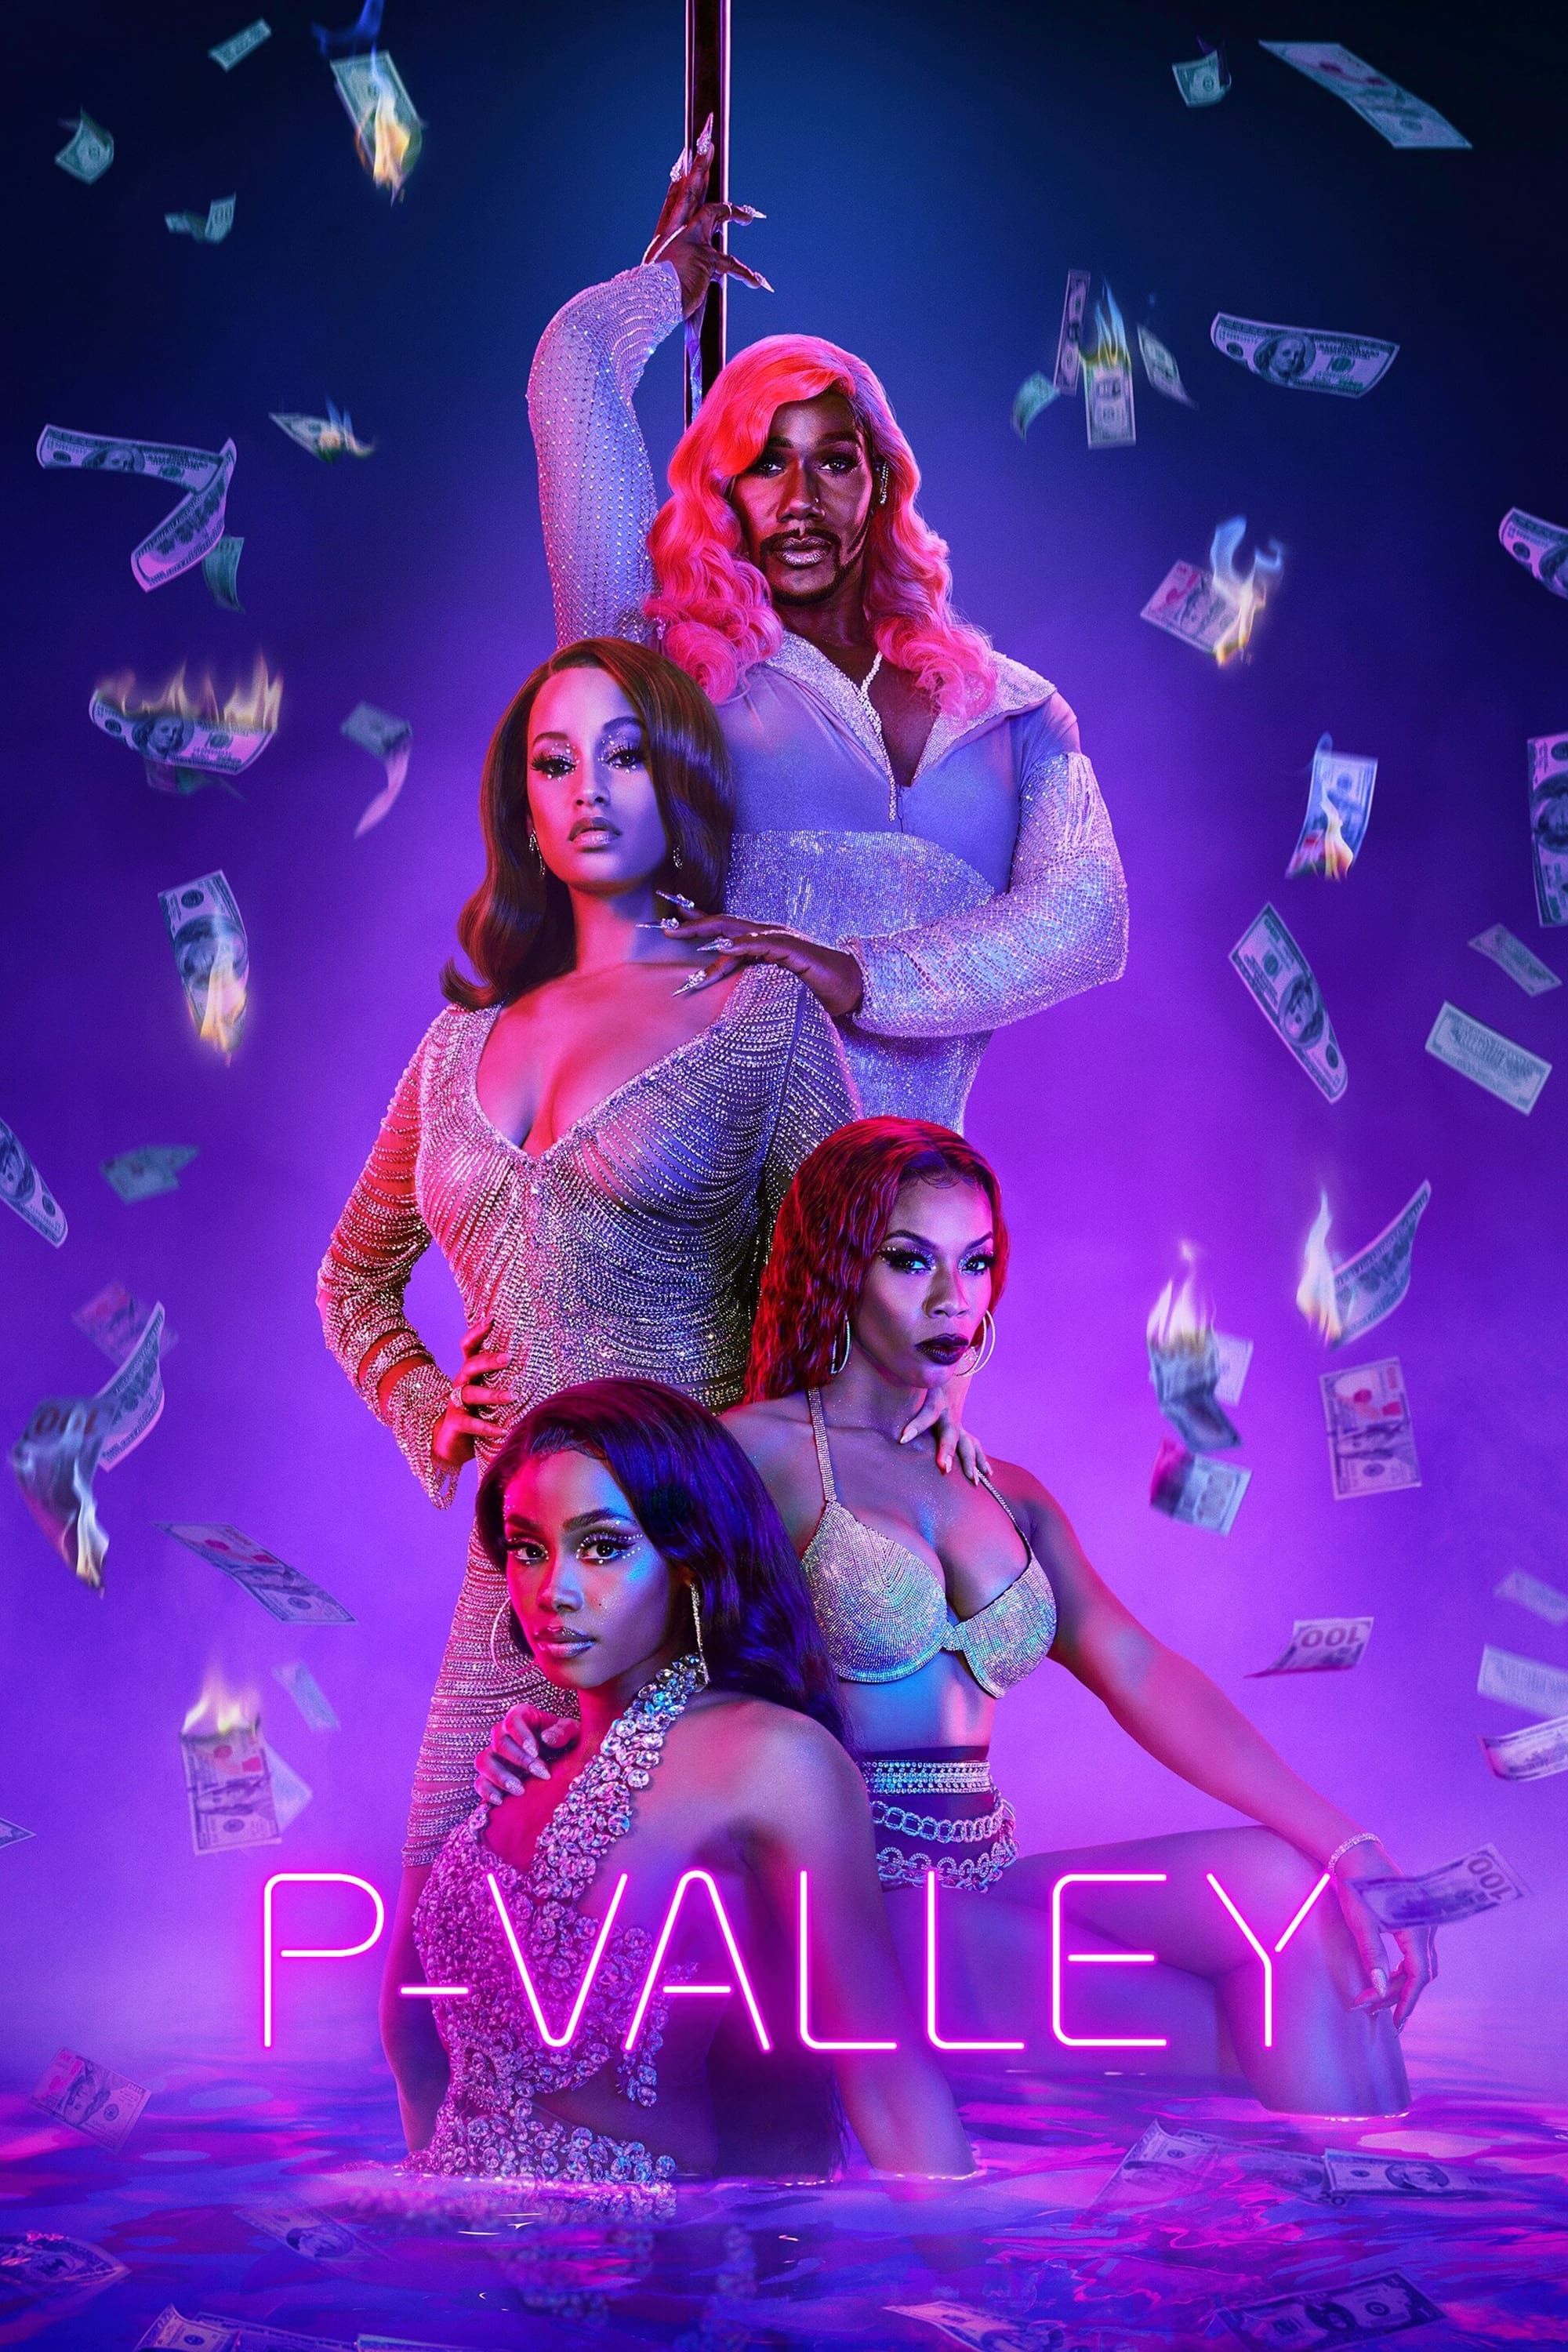 P-Valley TV Shows About Strip Club